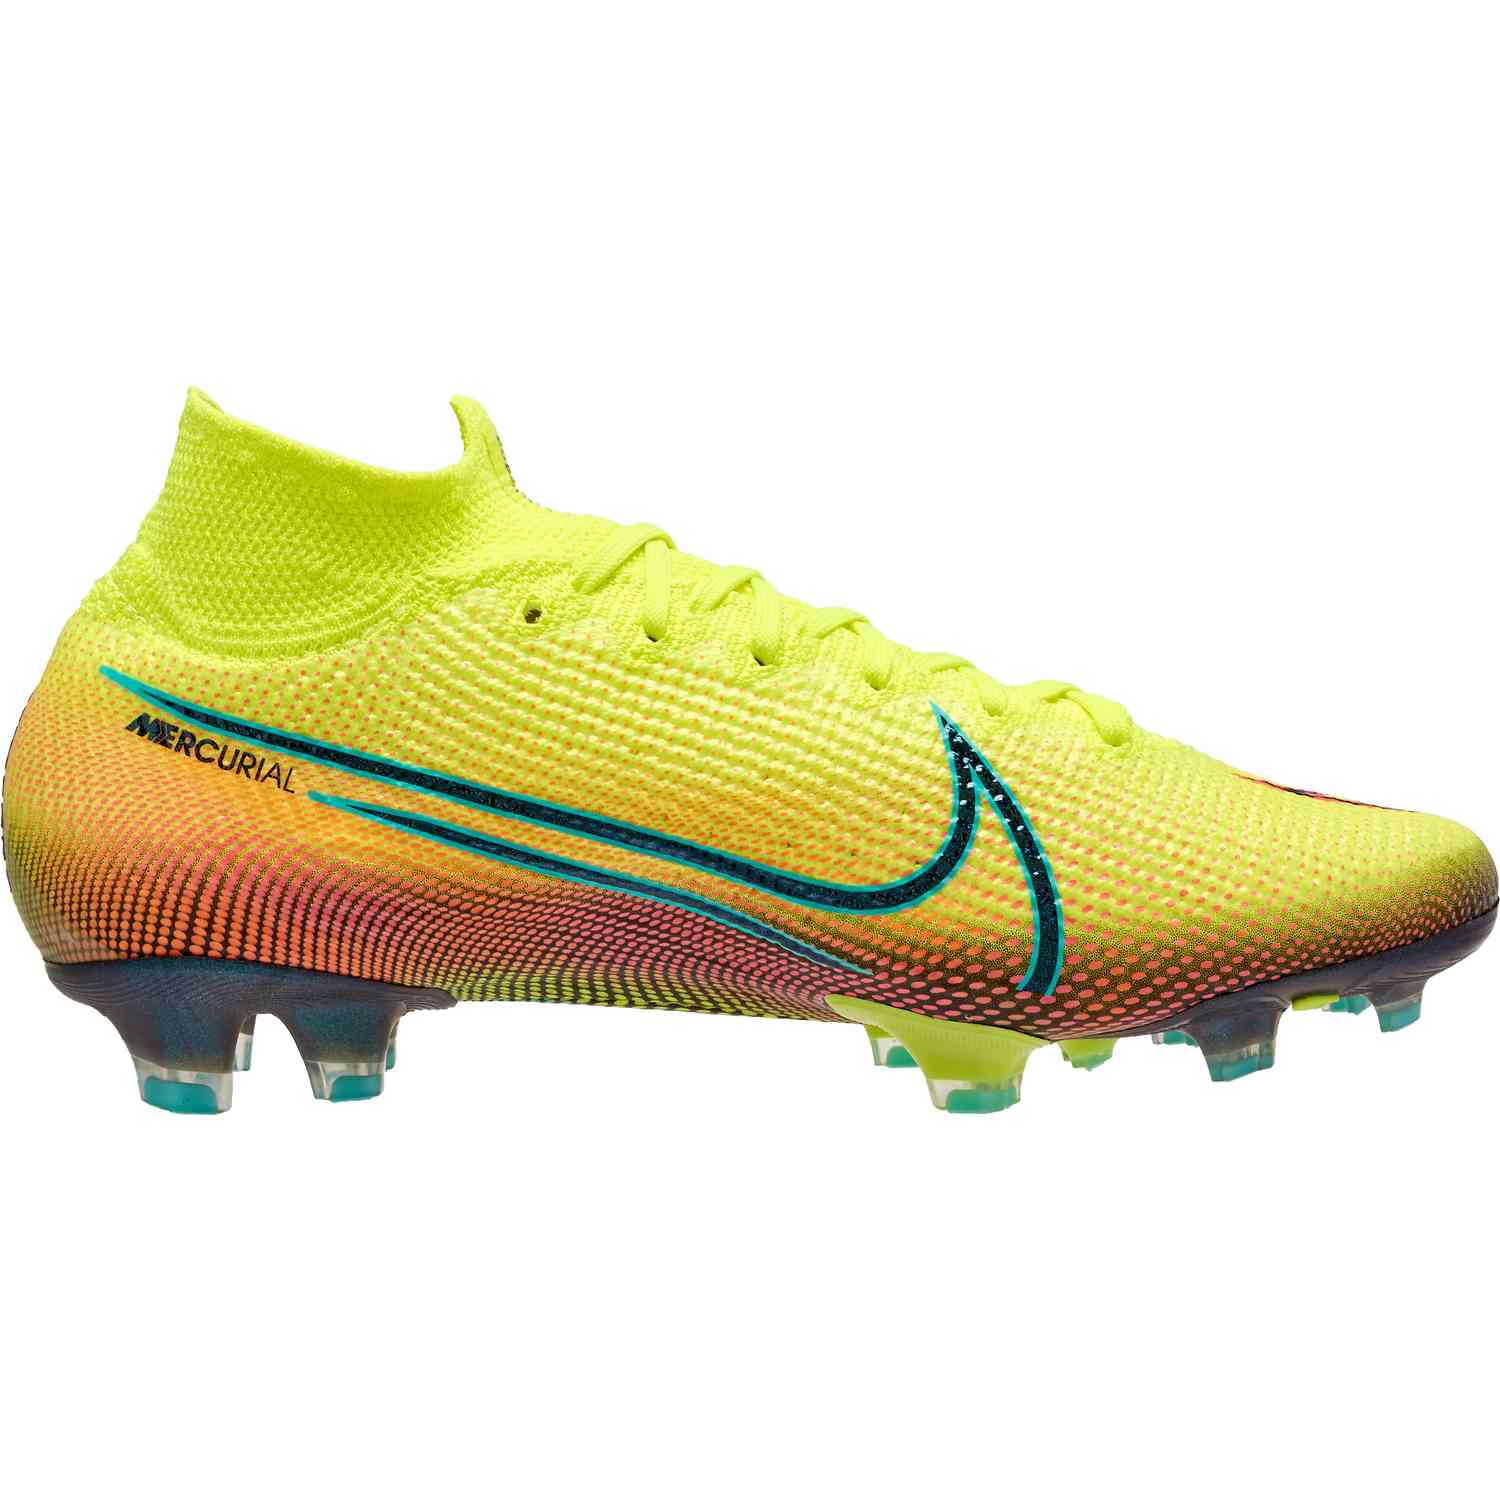 nike mercurial superfly 7 elite mds fg soccer cleats